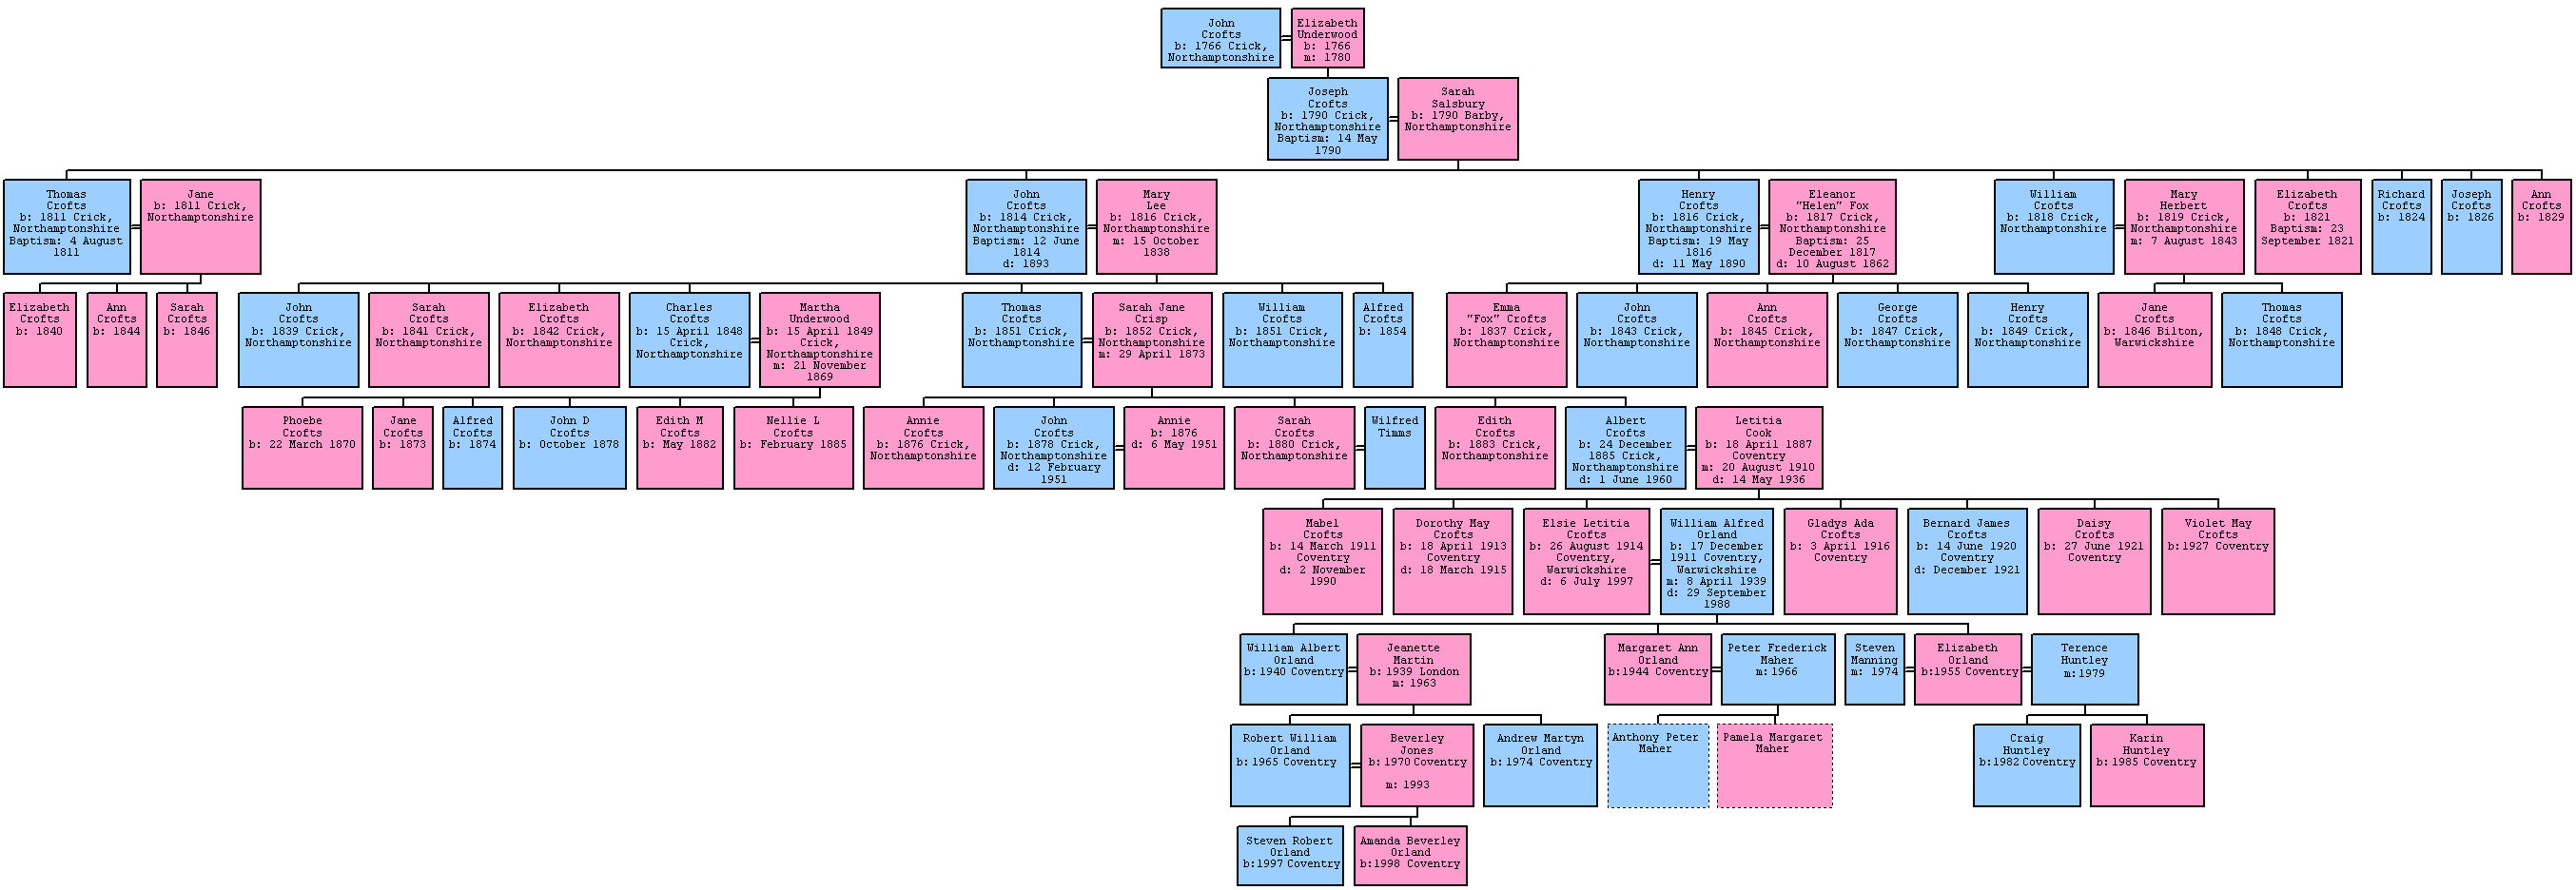 Family Tree of the Crofts family from Crick